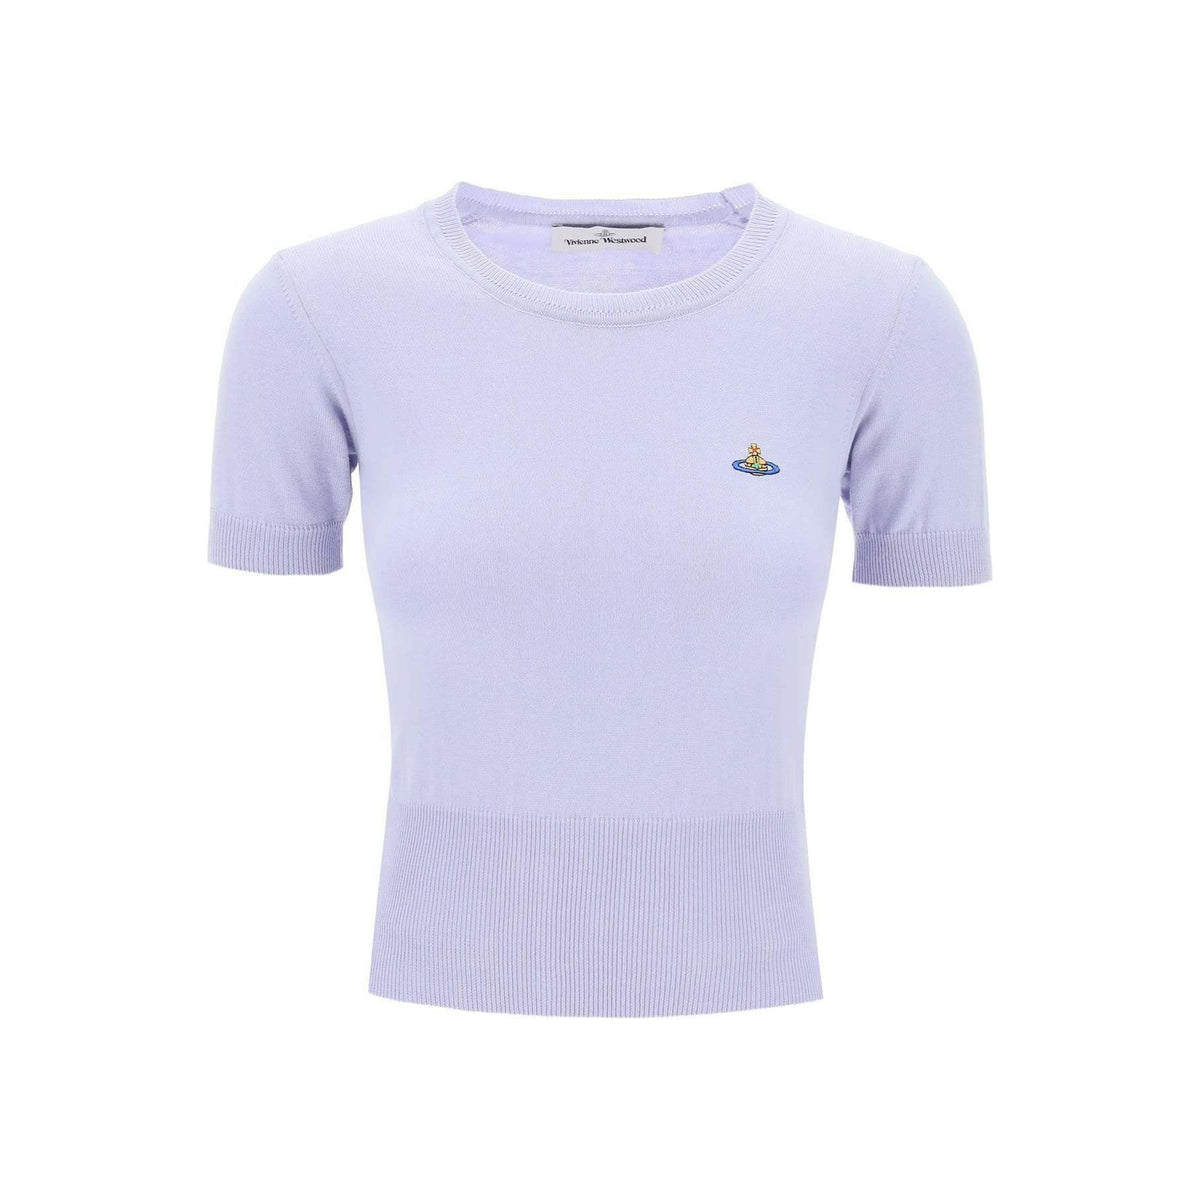 VIVIENNE WESTWOOD - Lavender Bea Short Sleeve Cotton Sweater With Orb Embroidery - JOHN JULIA